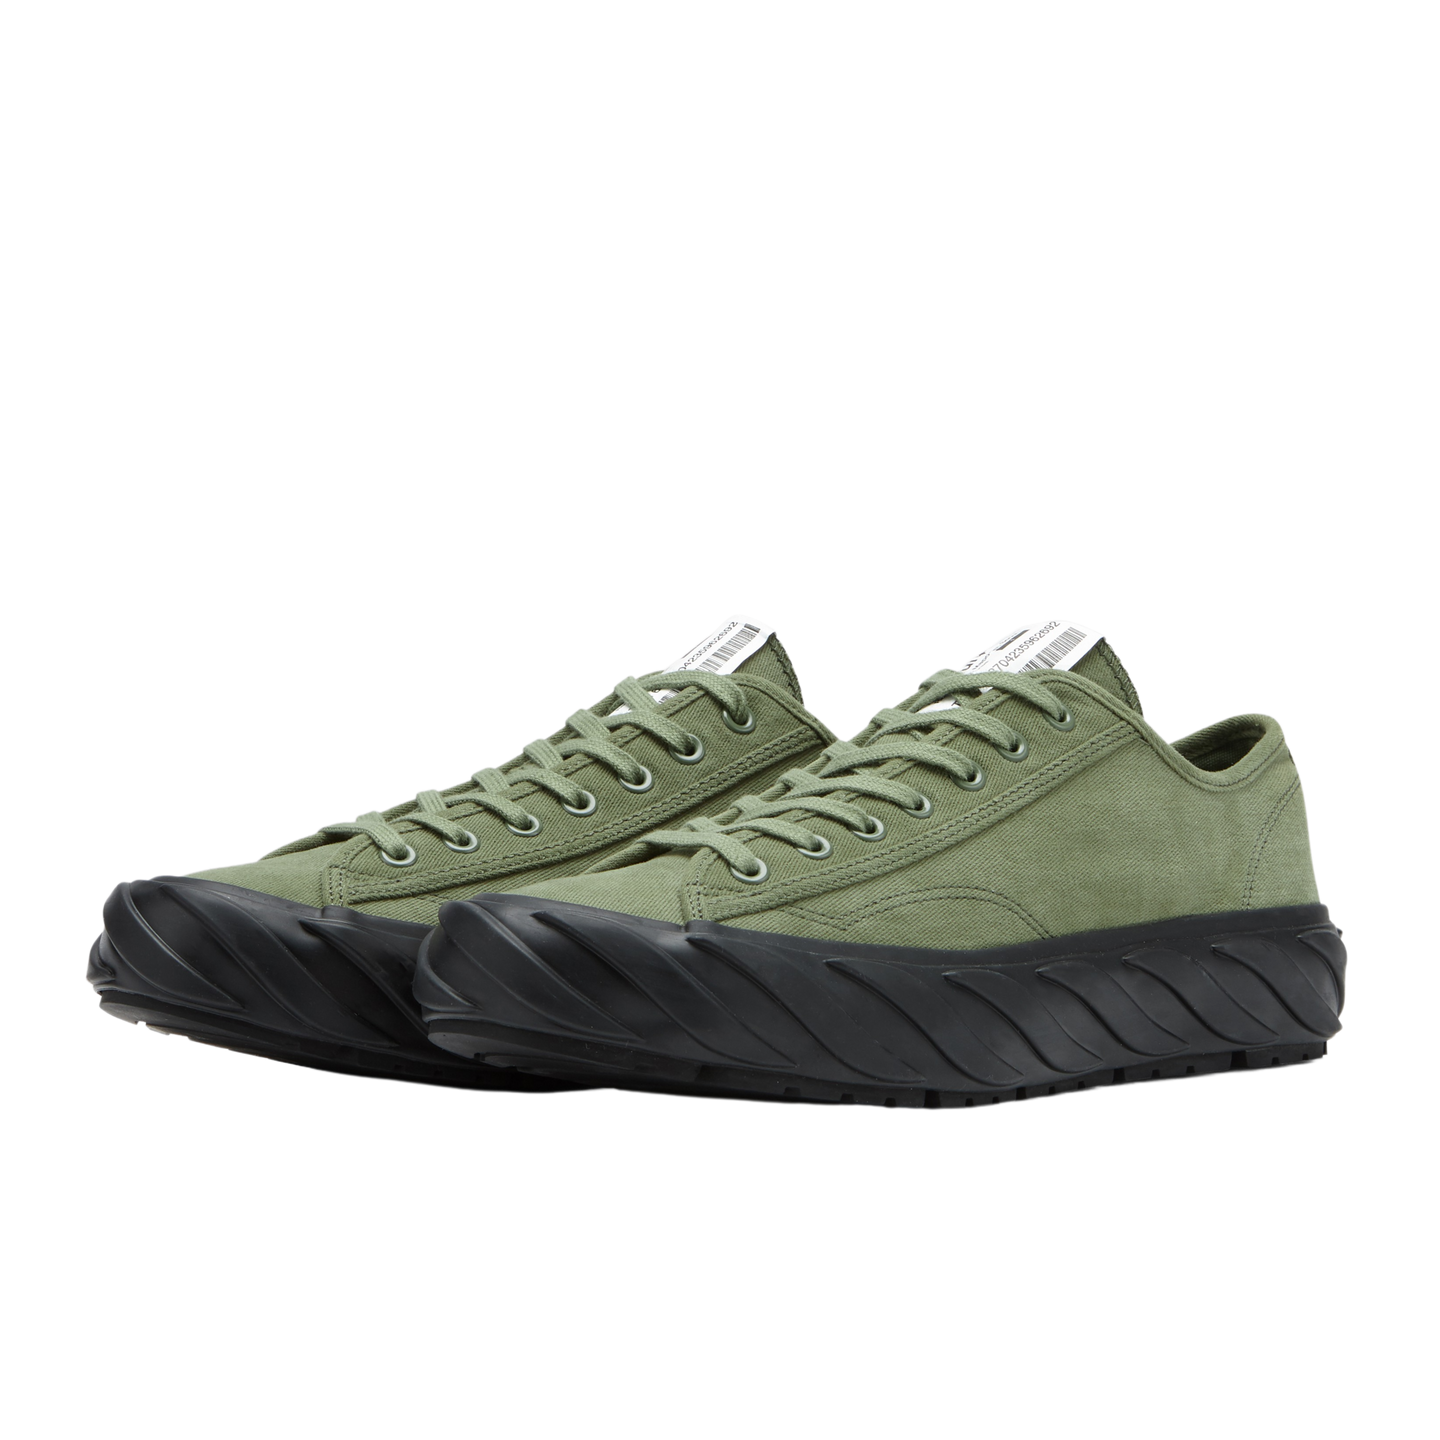 AGE SNEAKERS Cut Camouflage Field